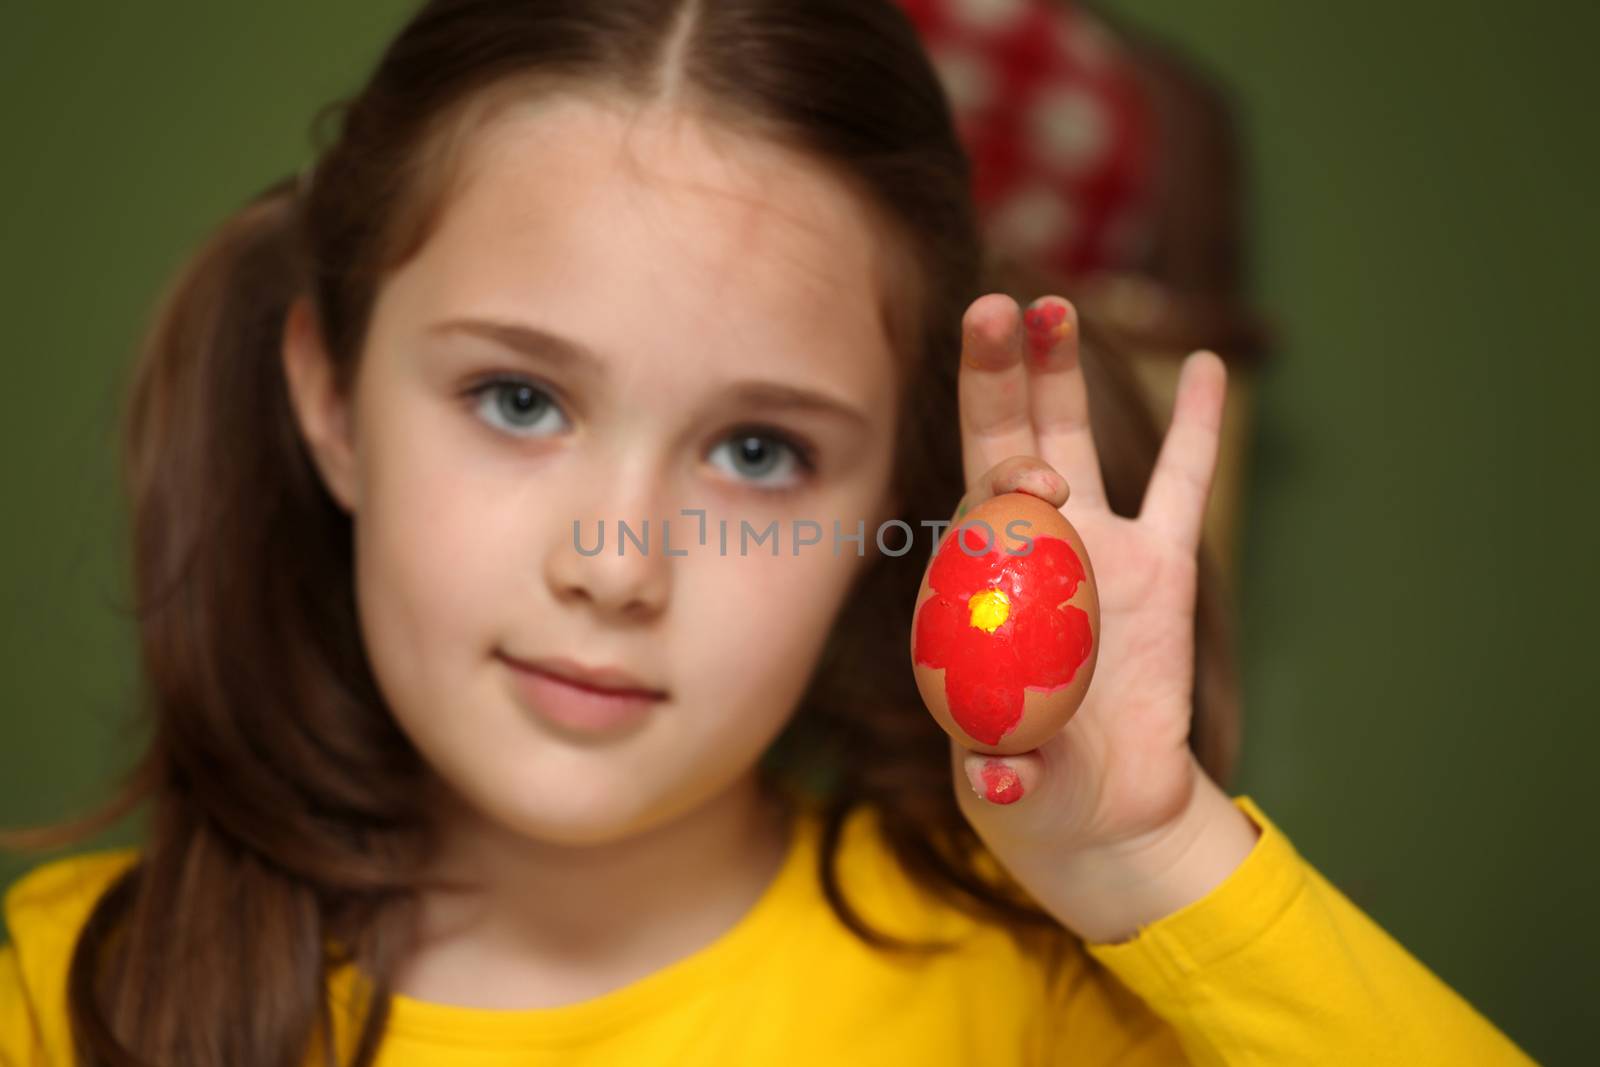 Girl painted Easter eggs by vladacanon